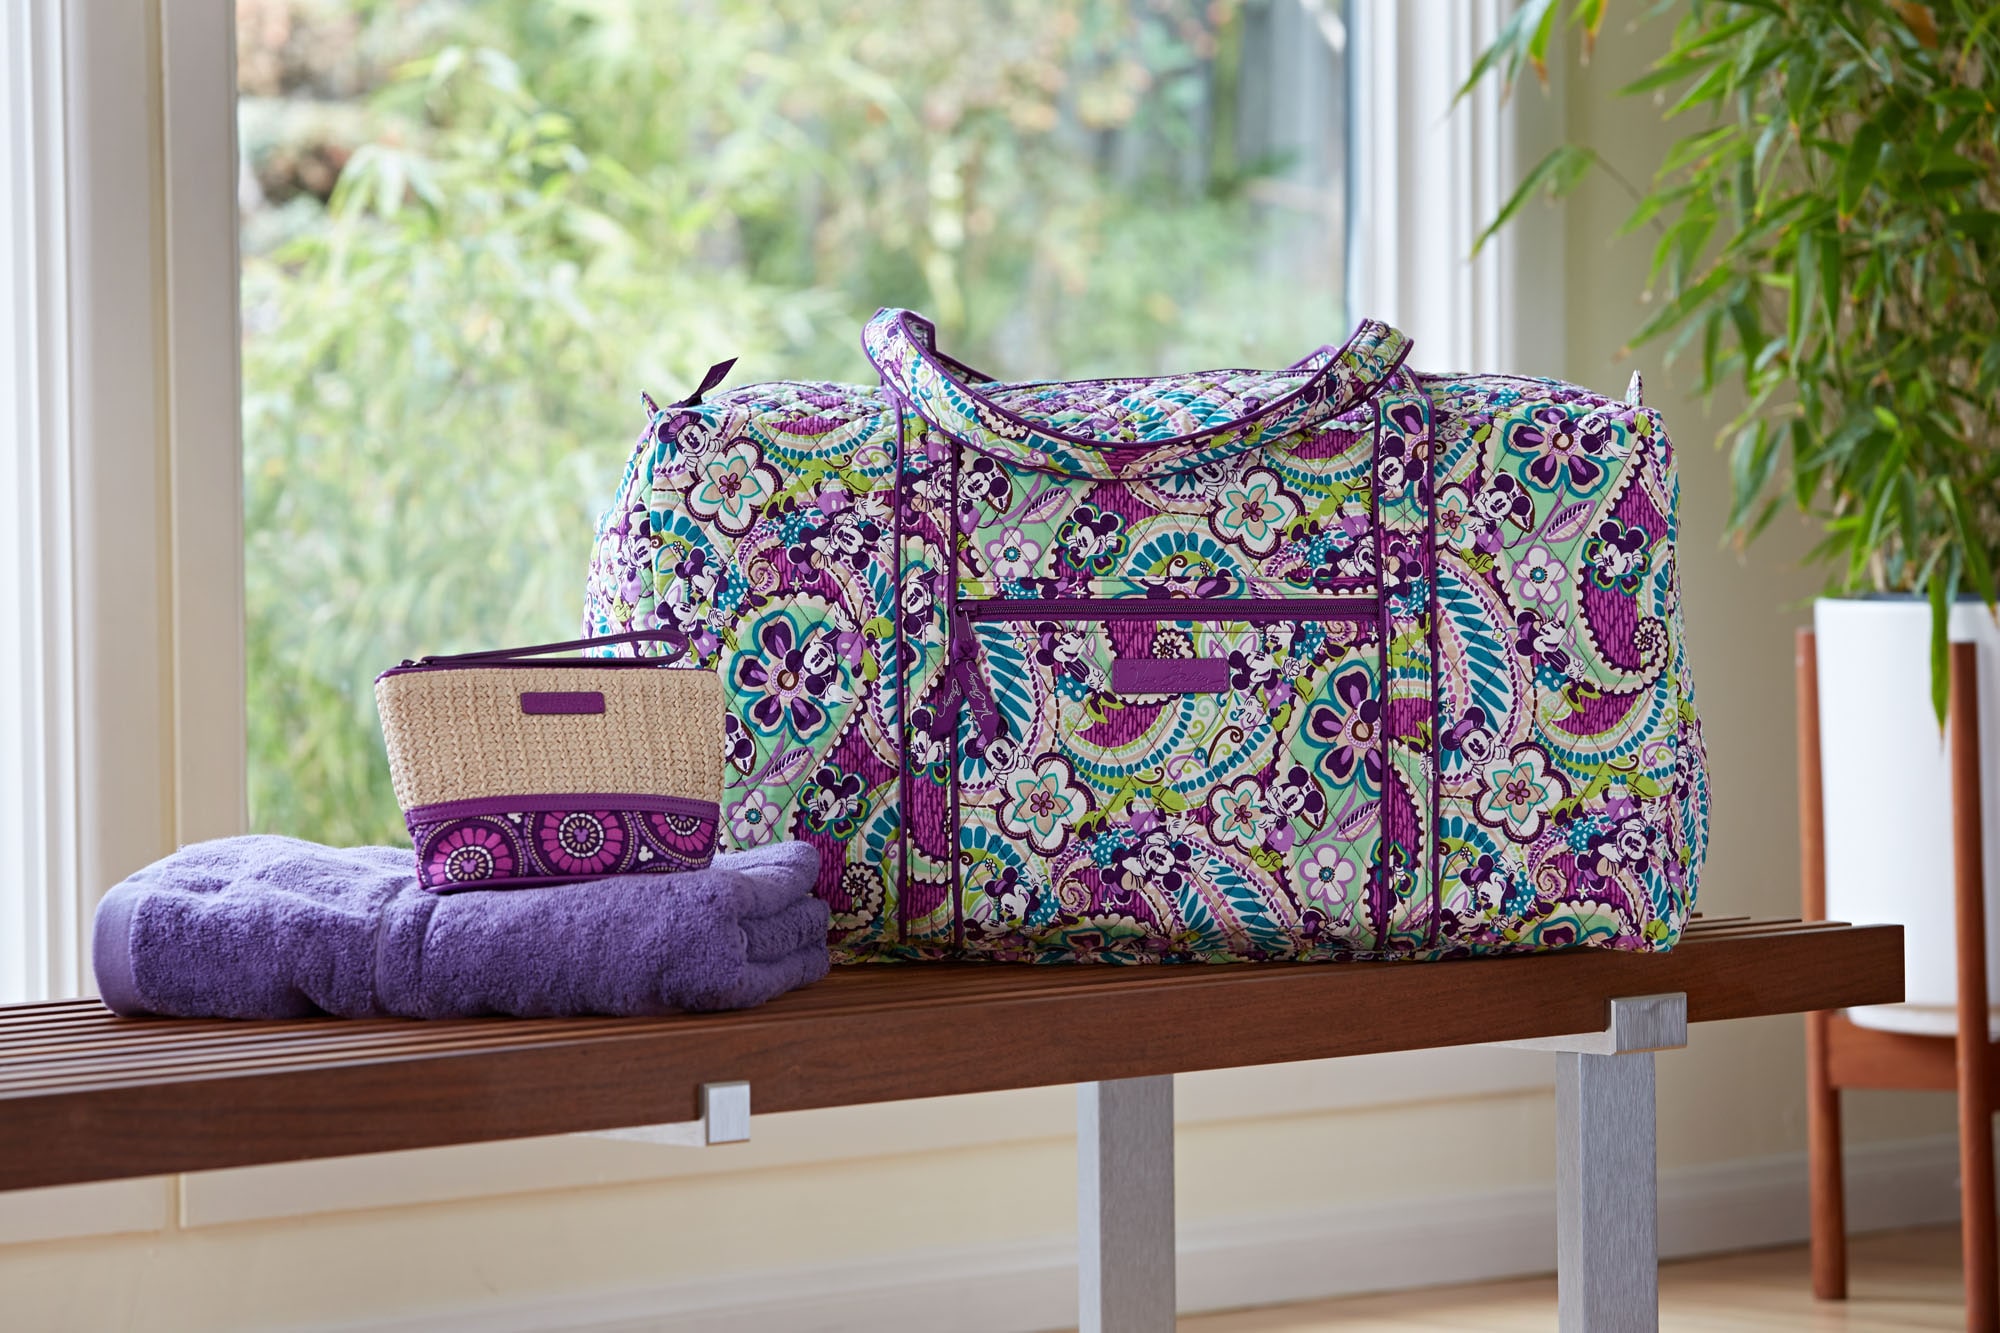 Plums Up to New Disney Parks Collection by Vera Bradley for Spring